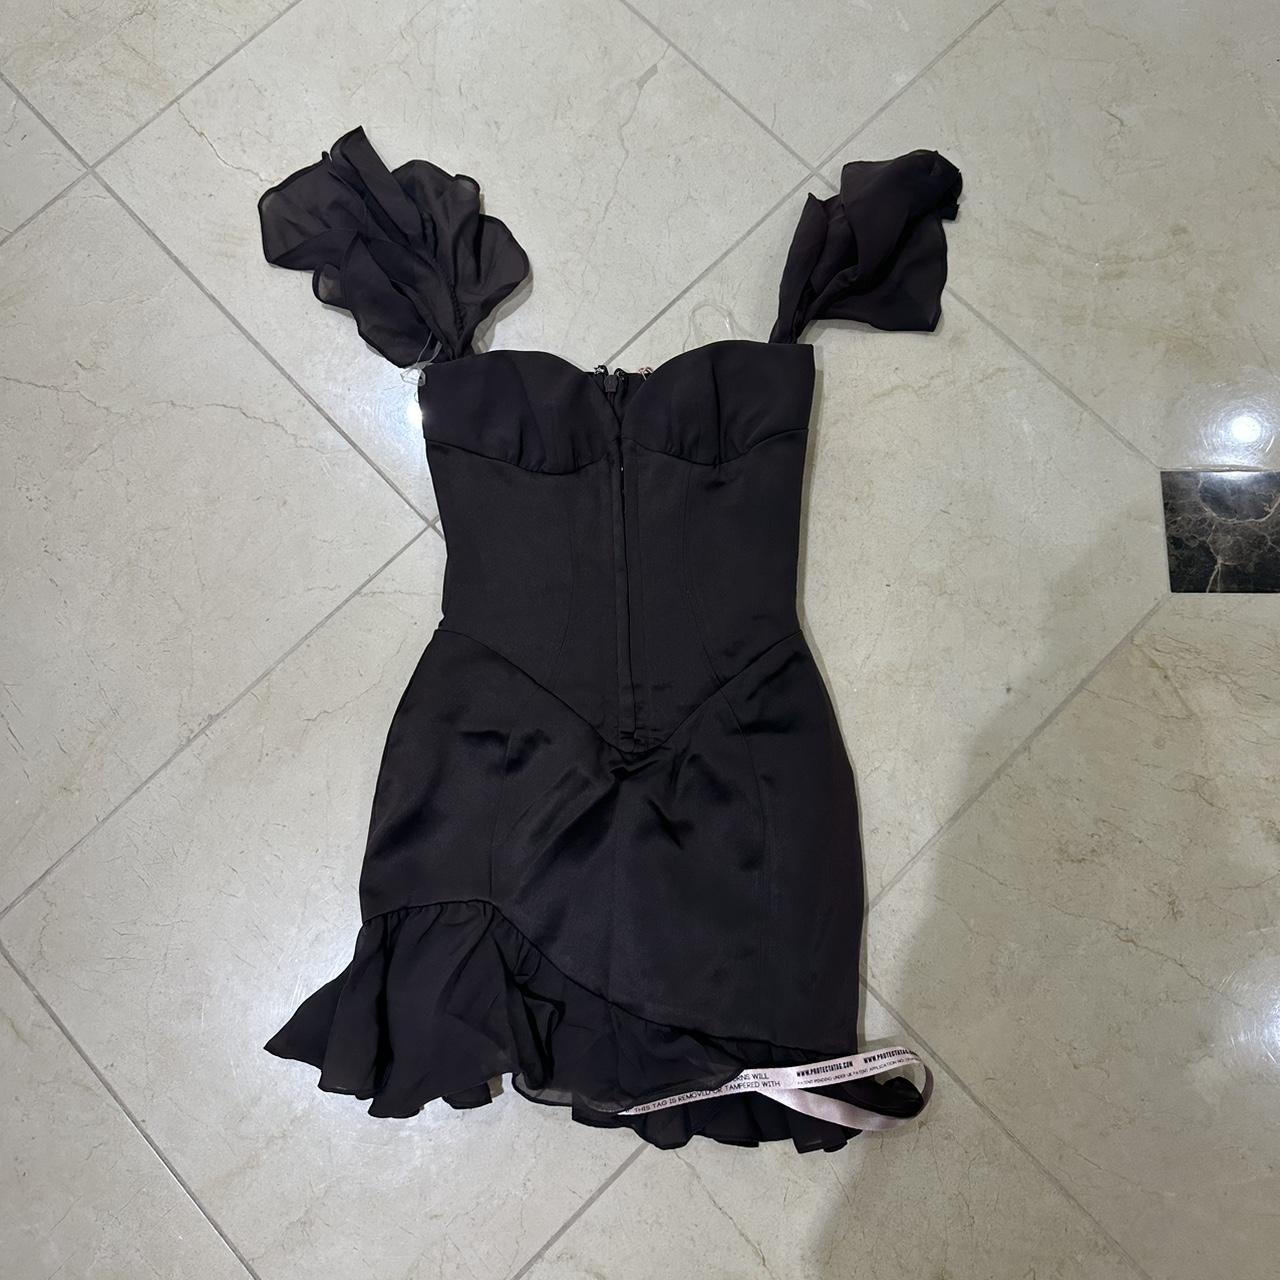 HOUSE OF CB Mini Dress Beautiful for any occasion... - Depop